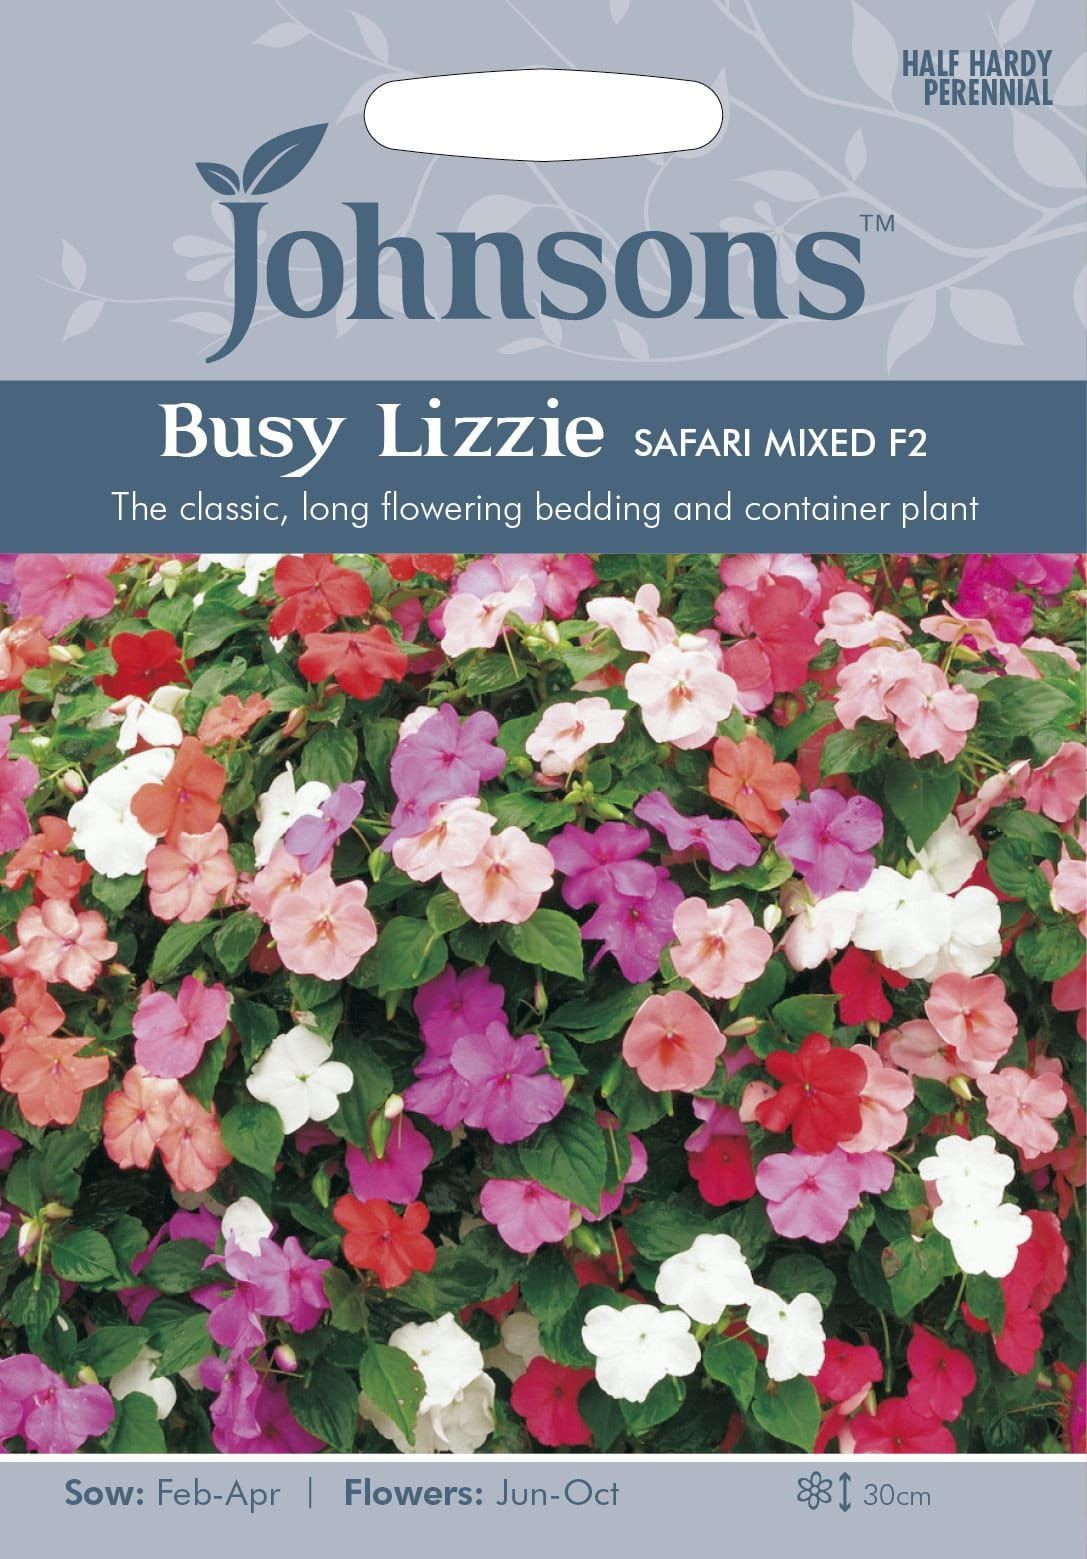 Johnsons Busy Lizzie Safari Mixed F2 50 Seeds